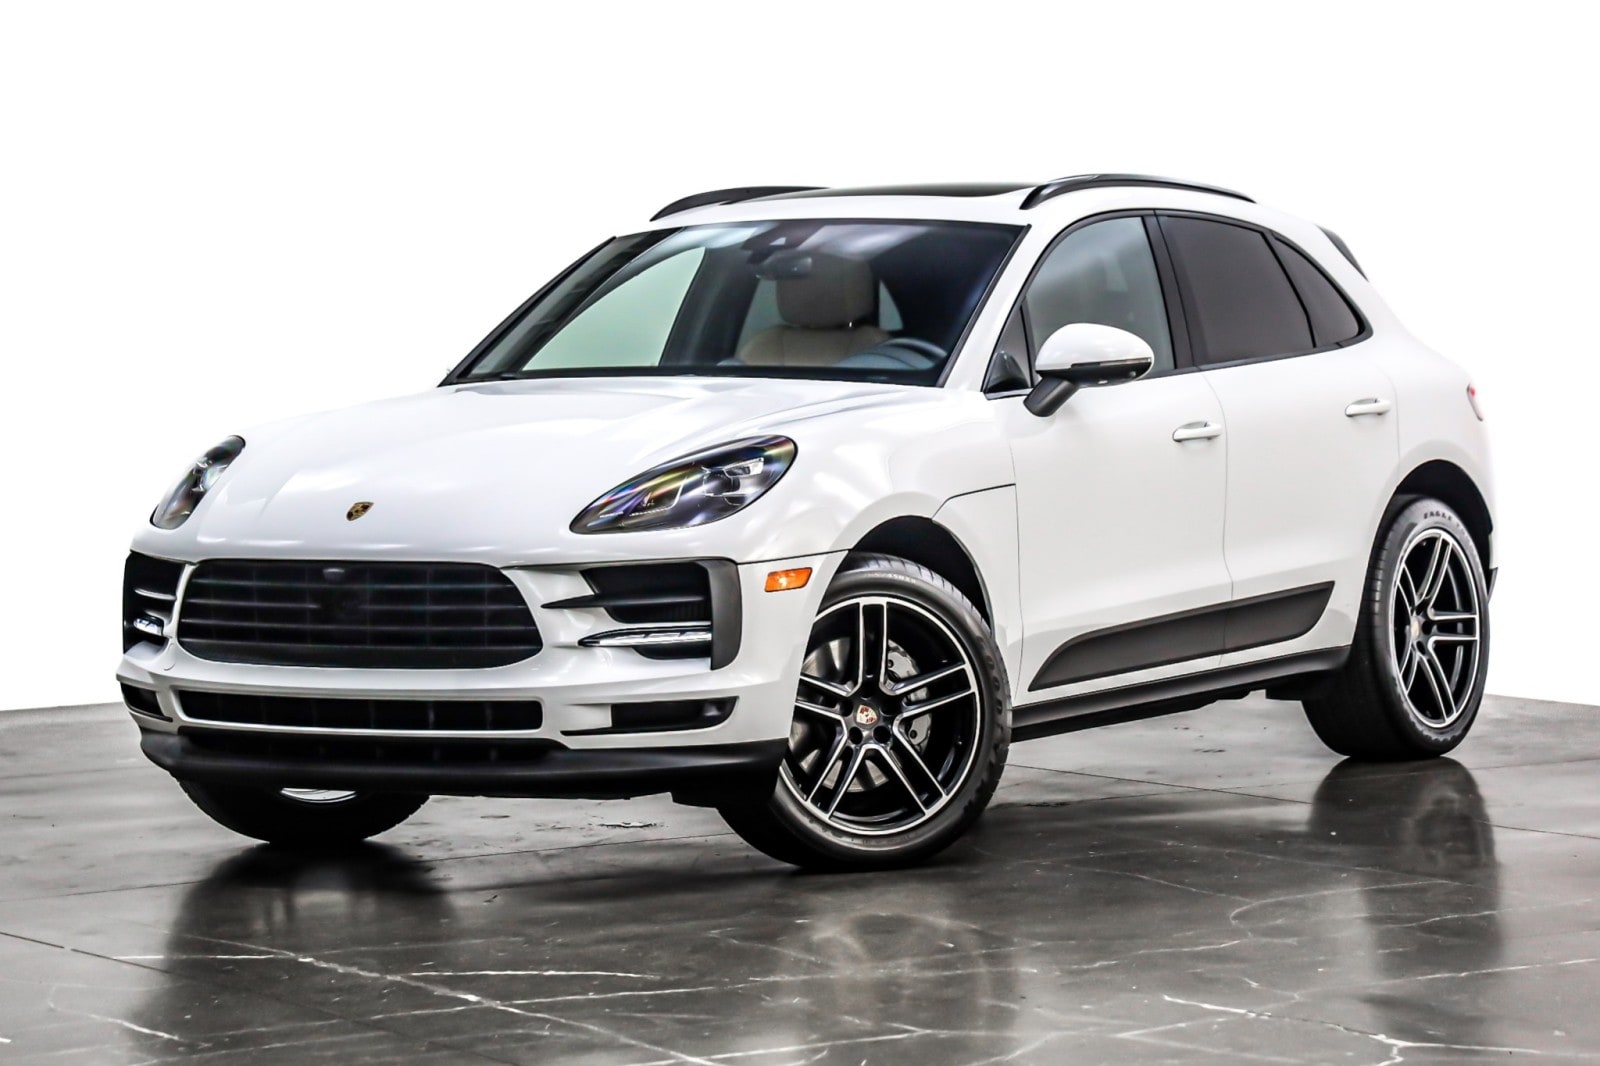 Used 2021 Porsche Macan S with VIN WP1AB2A5XMLB38149 for sale in Costa Mesa, CA